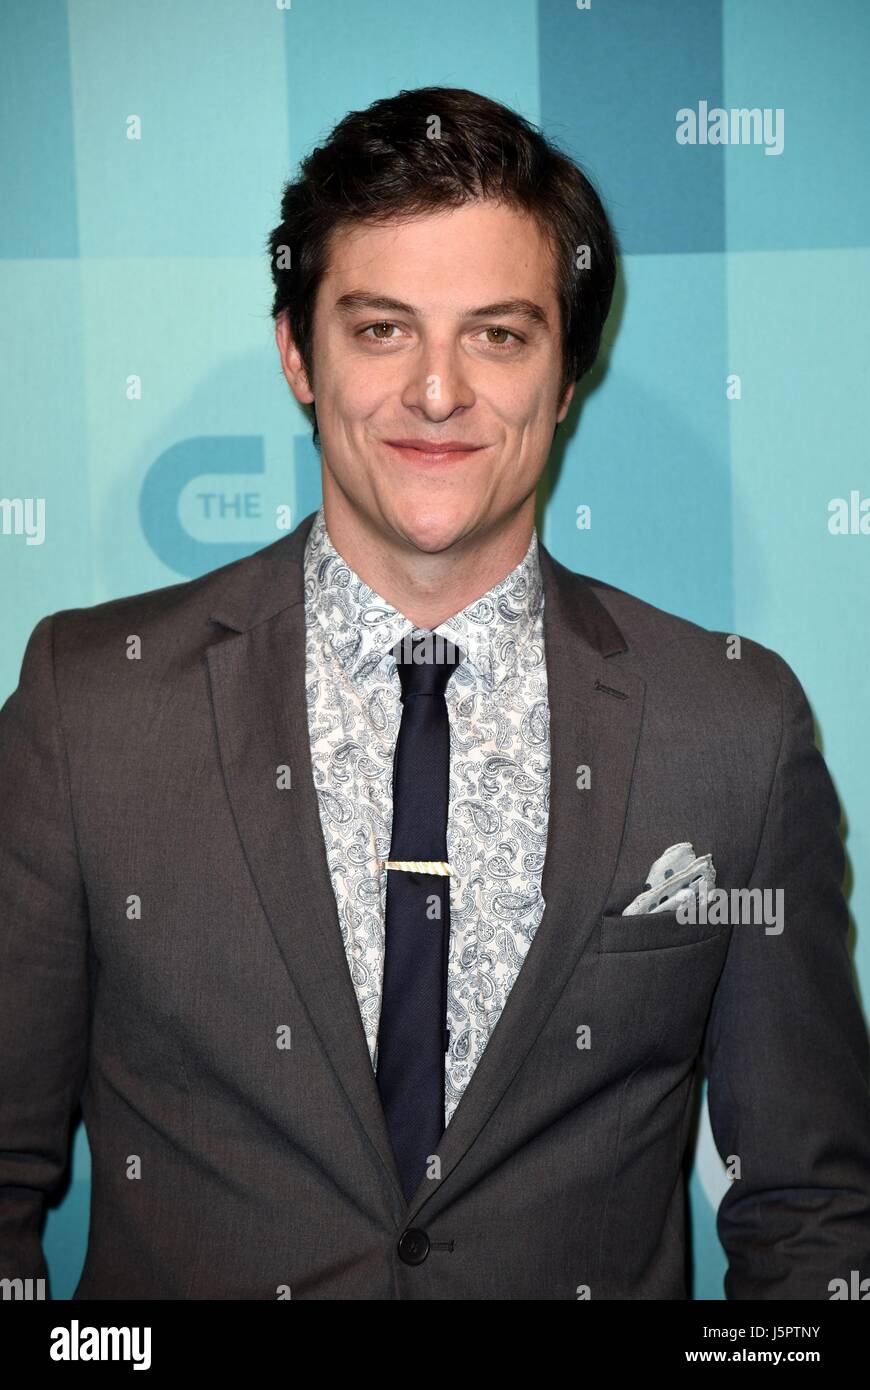 New York, NY, USA. 18th May, 2017. James Mackay at arrivals for The CW Upfront 2017, The London Hotel, New York, NY May 18, 2017. Credit: Derek Storm/Everett Collection/Alamy Live News Stock Photo